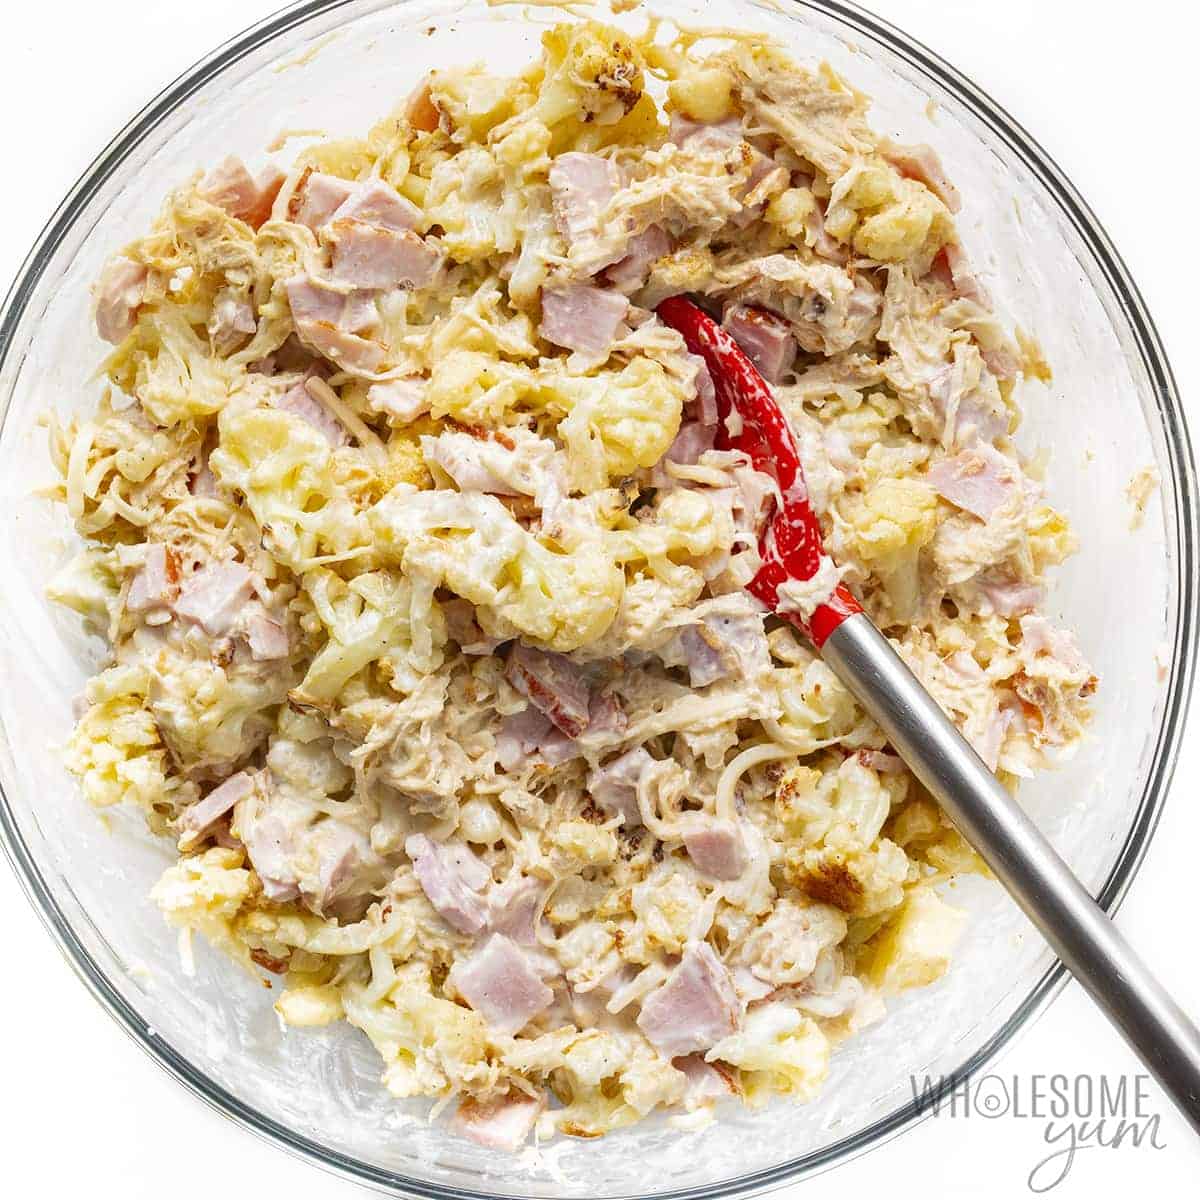 Cream base mixed with meat and cauliflower.